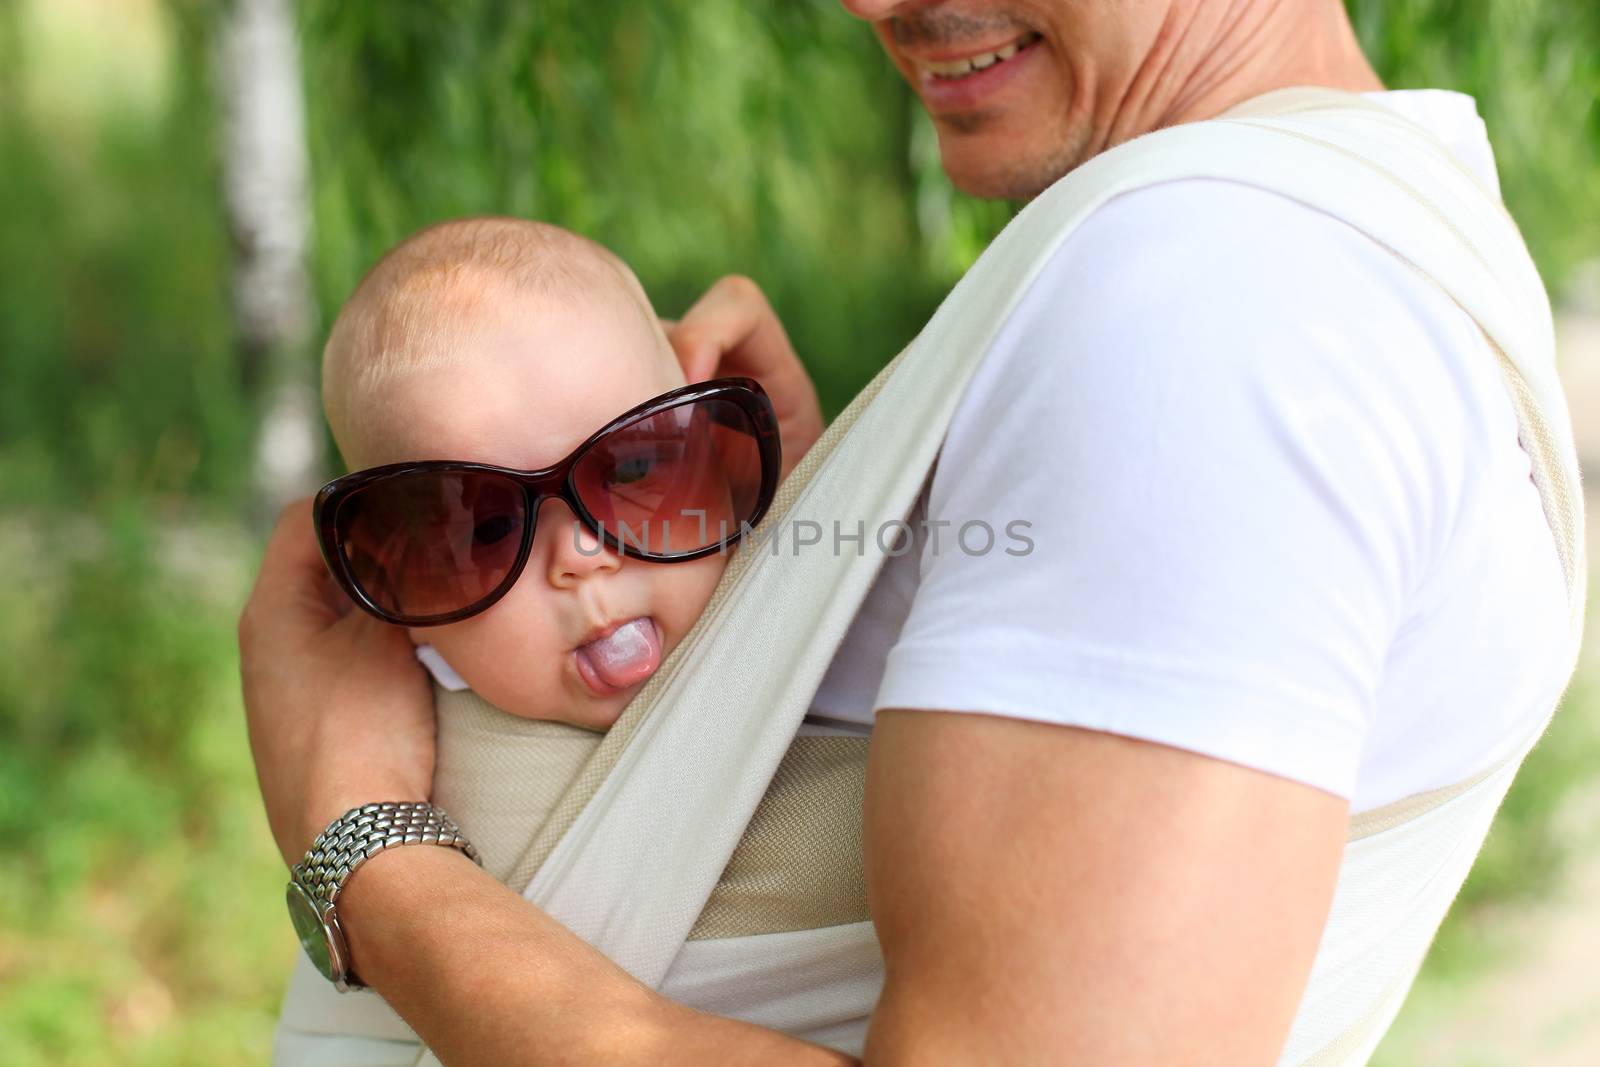 Closeup of baby boy in sling while his father is trying sunglasses on him, humorous aspect